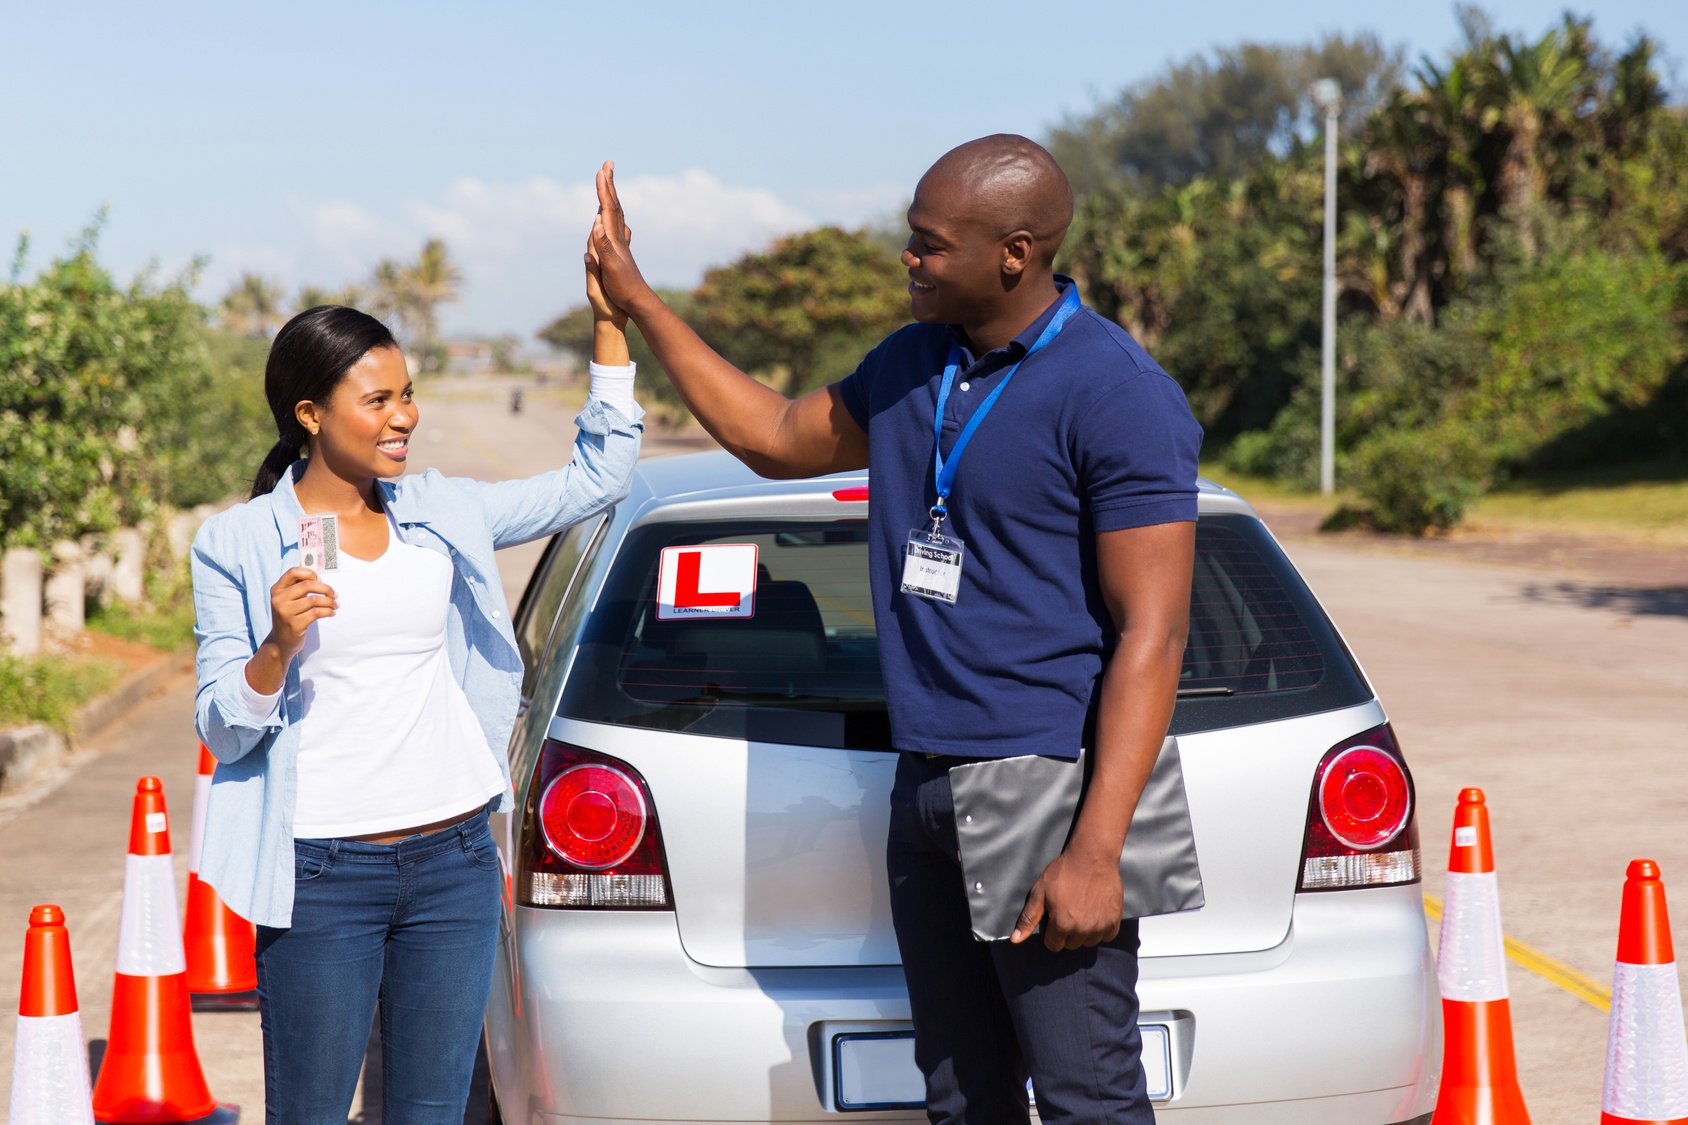 happy african girl and driving instructor doing high five after getting her driving license